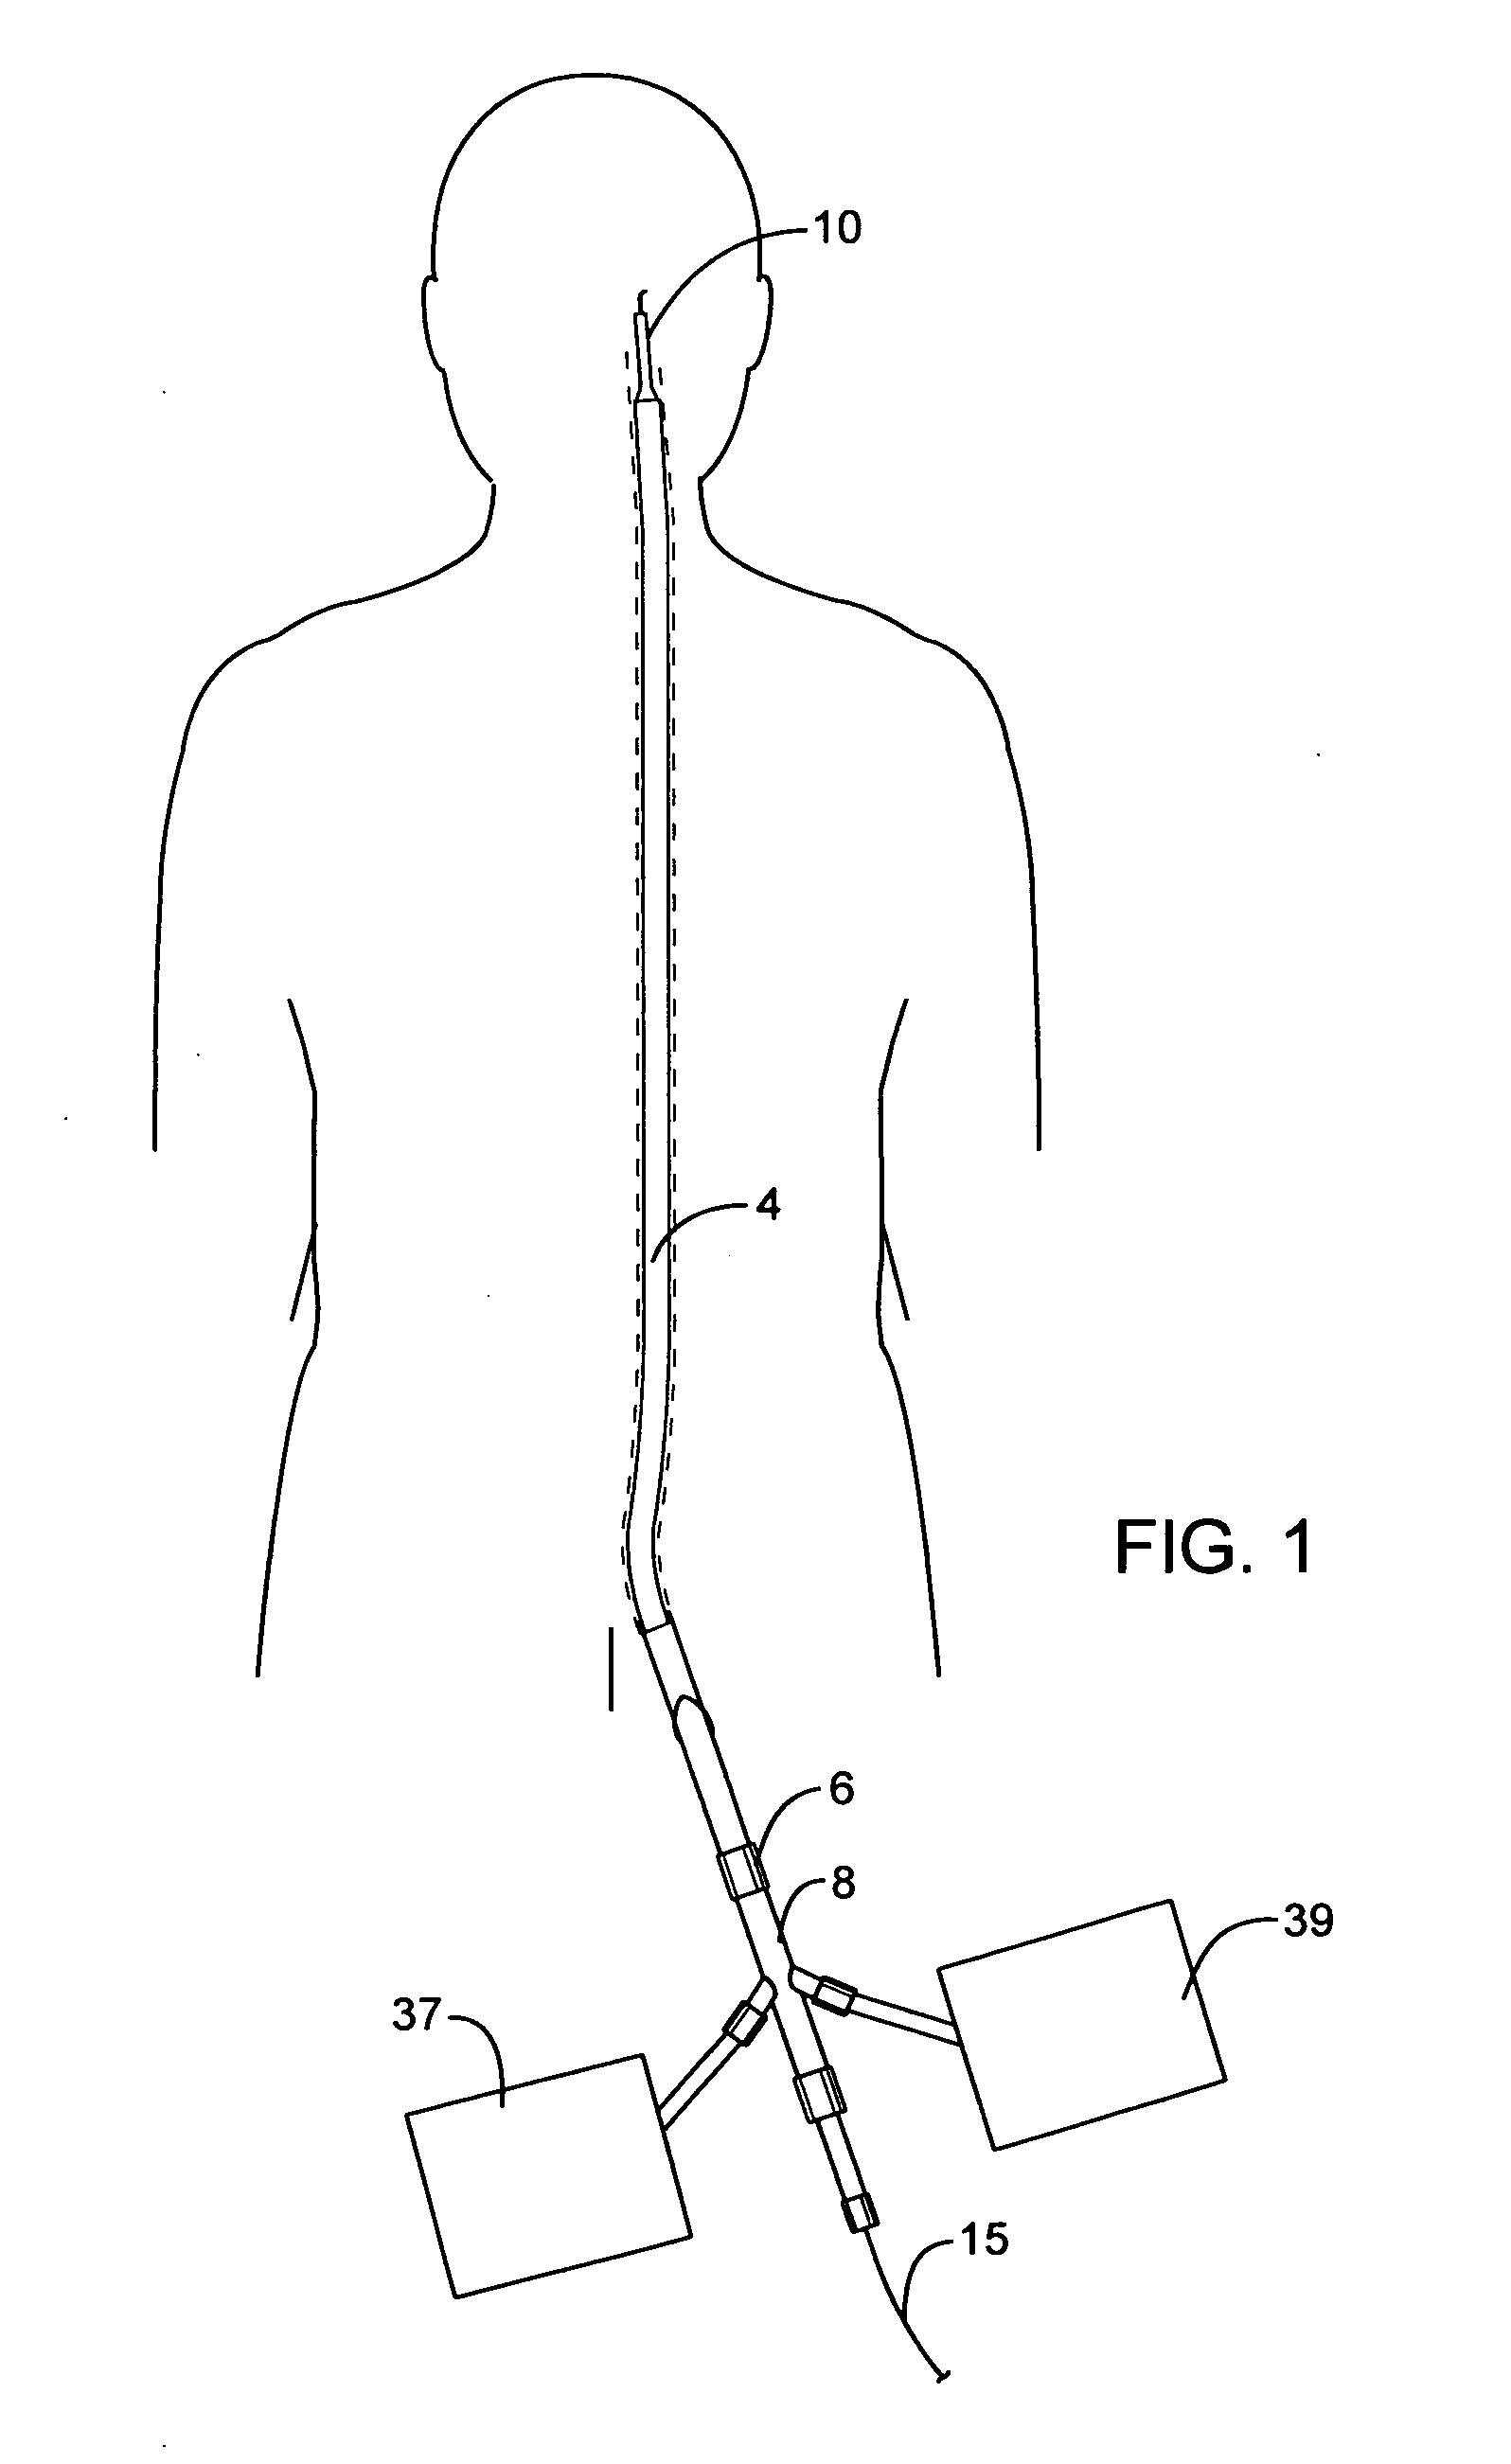 Methods and devices for protecting a passageway in a body when advancing devices through the passageway